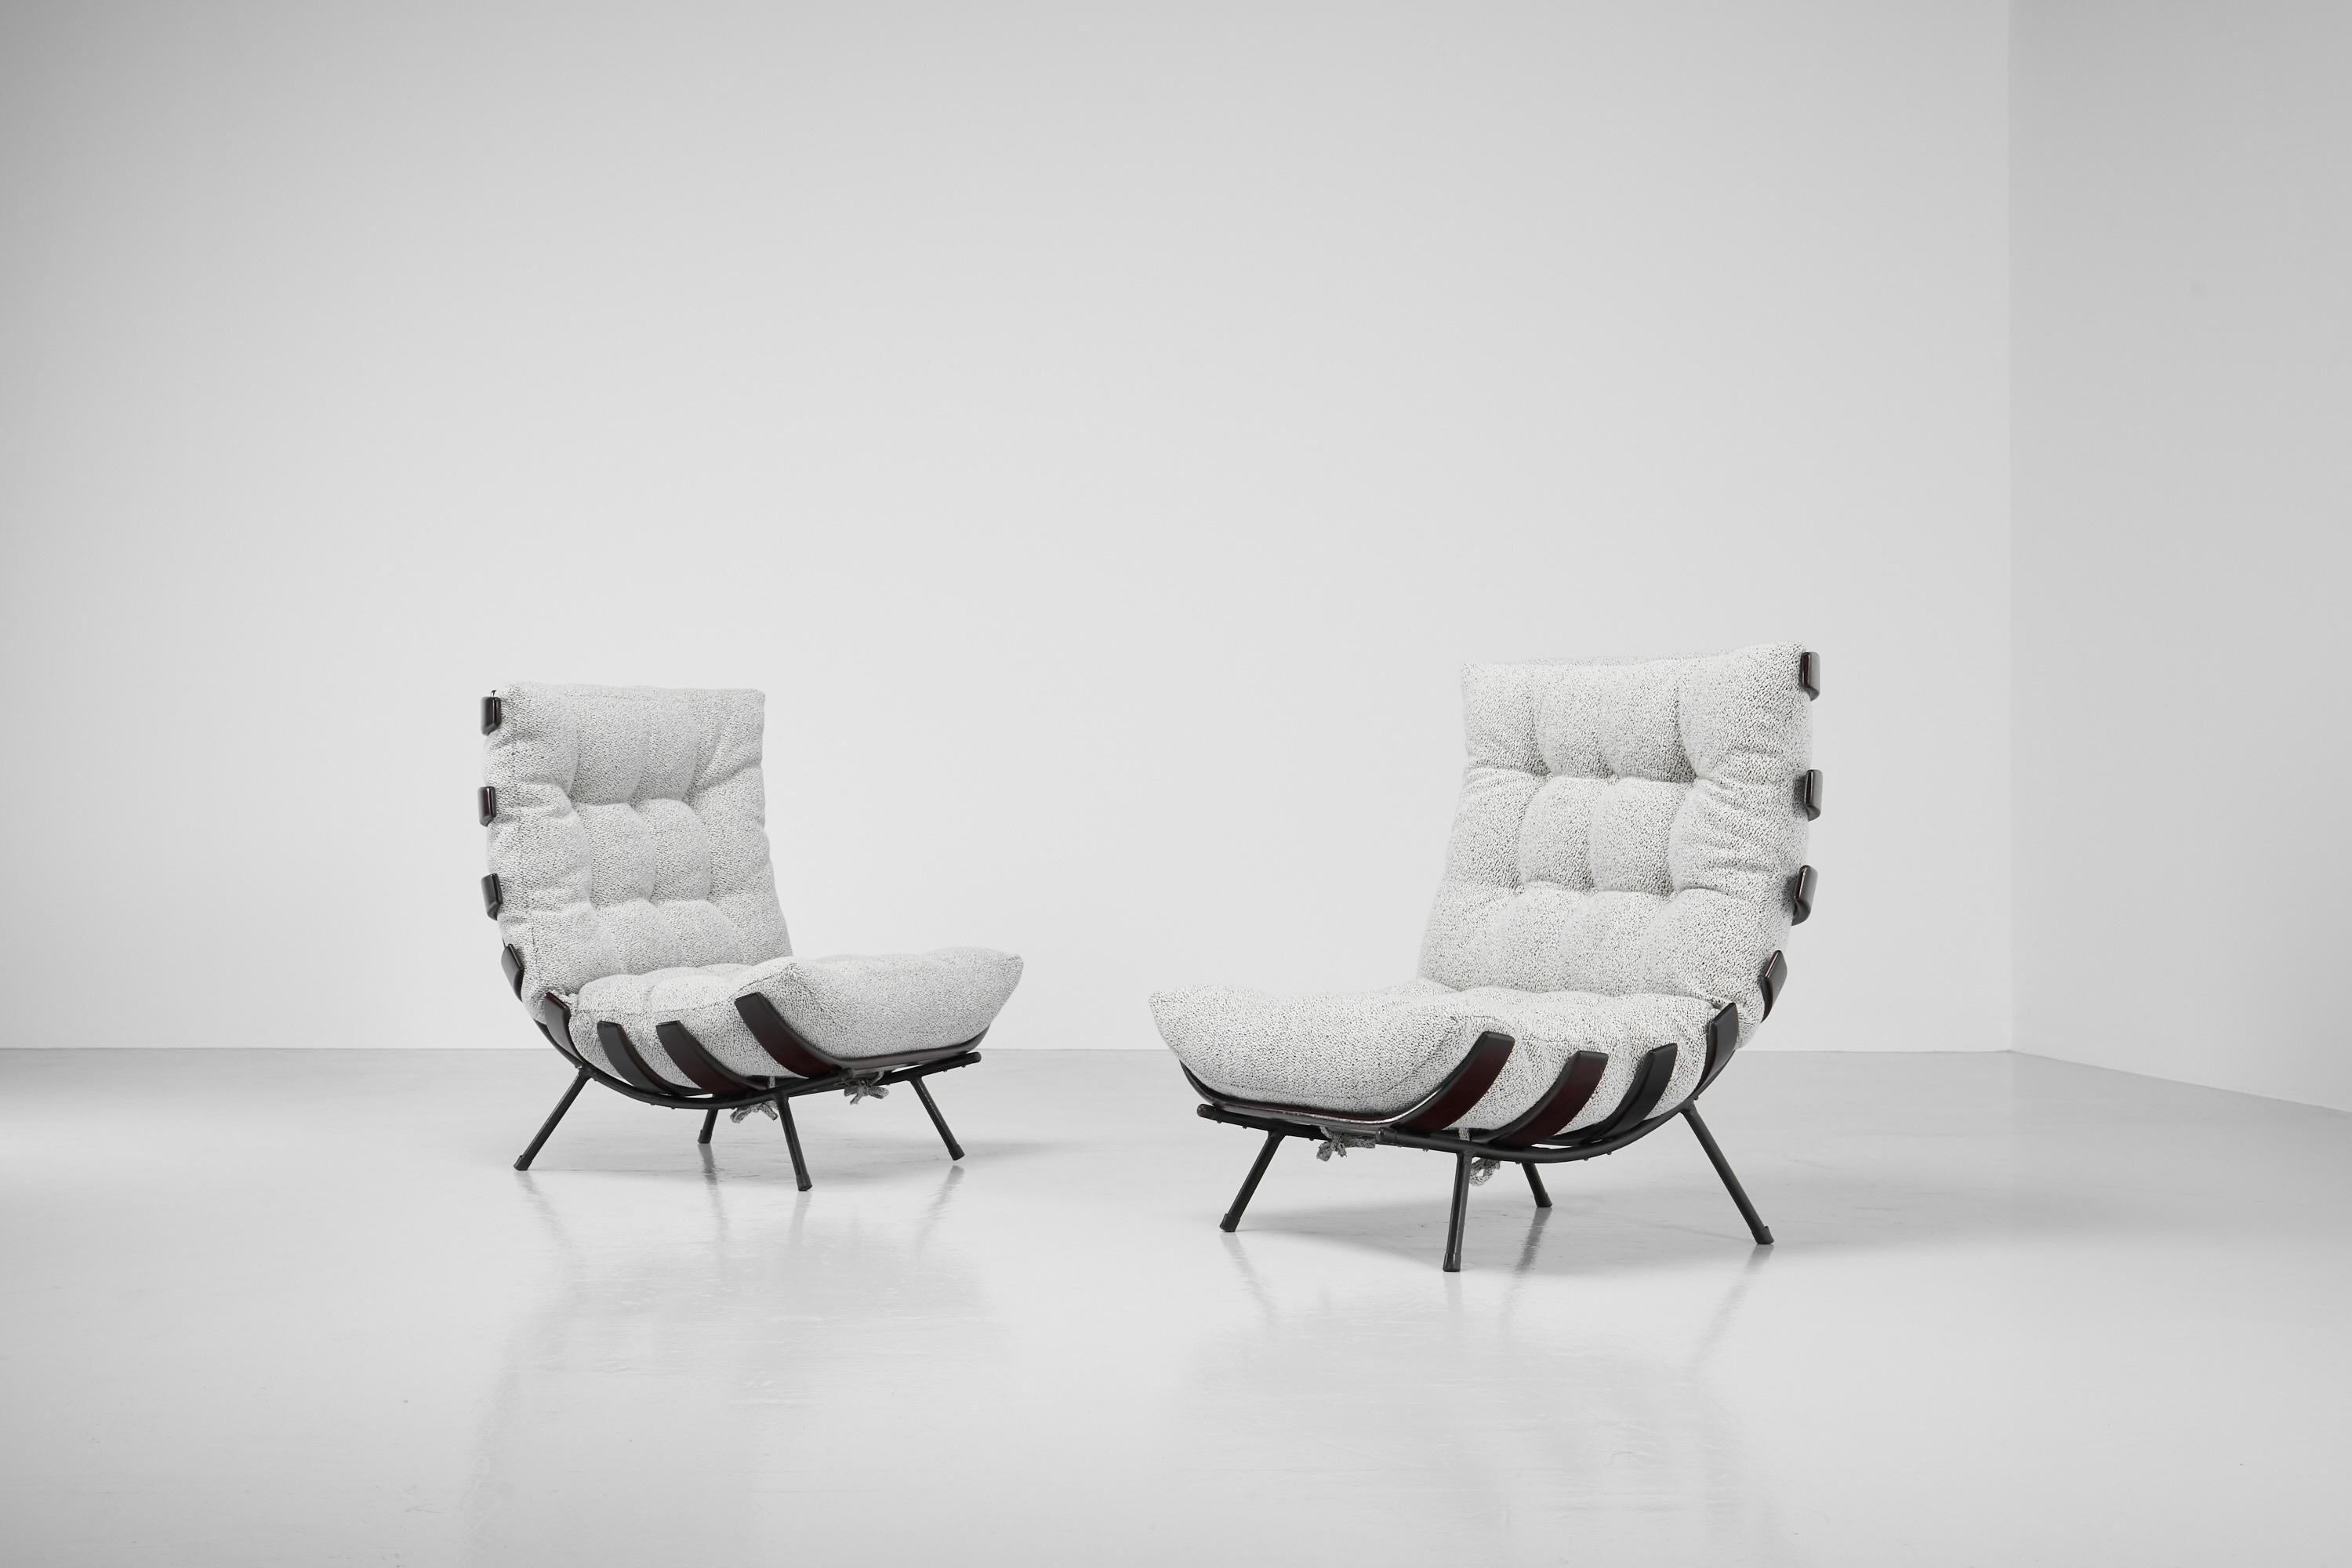 Beautiful and iconic ‘Costela’ lounge chairs designed by Carlo Hauner and Martin Eisler and manufactured by Forma, Italy 1960. This is the Brazilian version of the Costela chairs, manufactured by Forma Moveis. These so called Costela lounge chairs